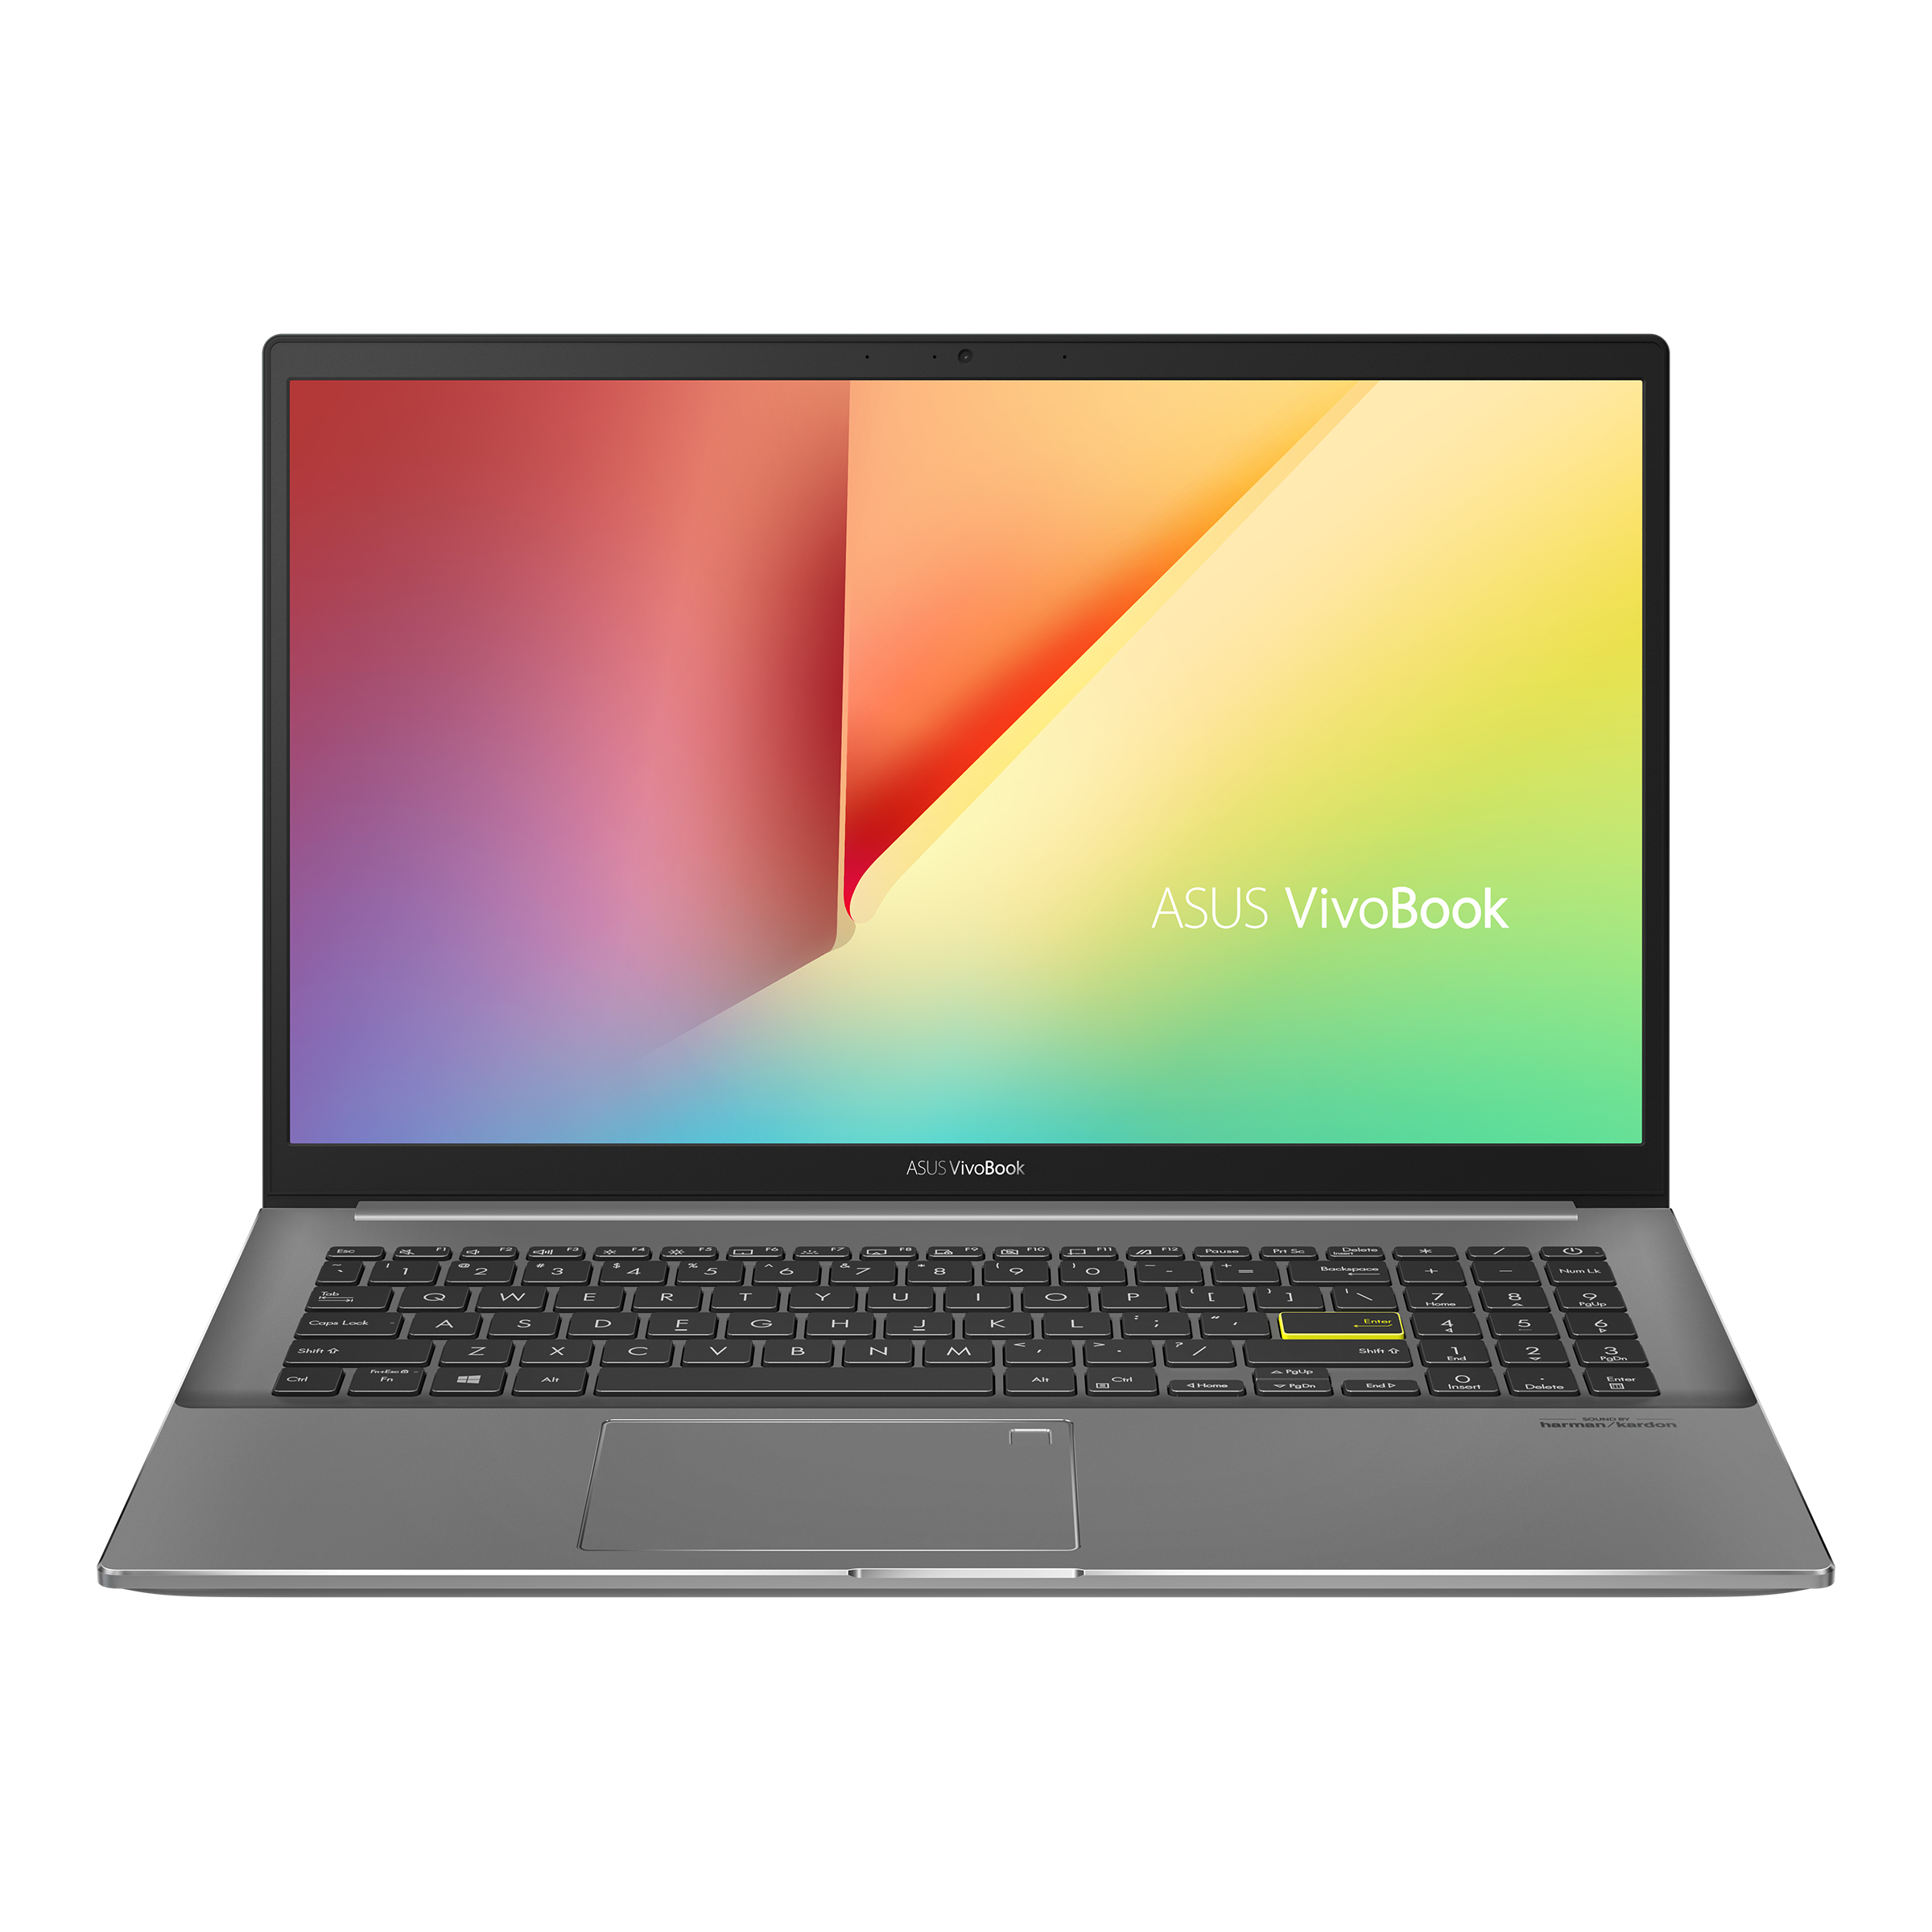 ASUS Vivobook S15 S533｜Laptops For Home｜ASUS USA